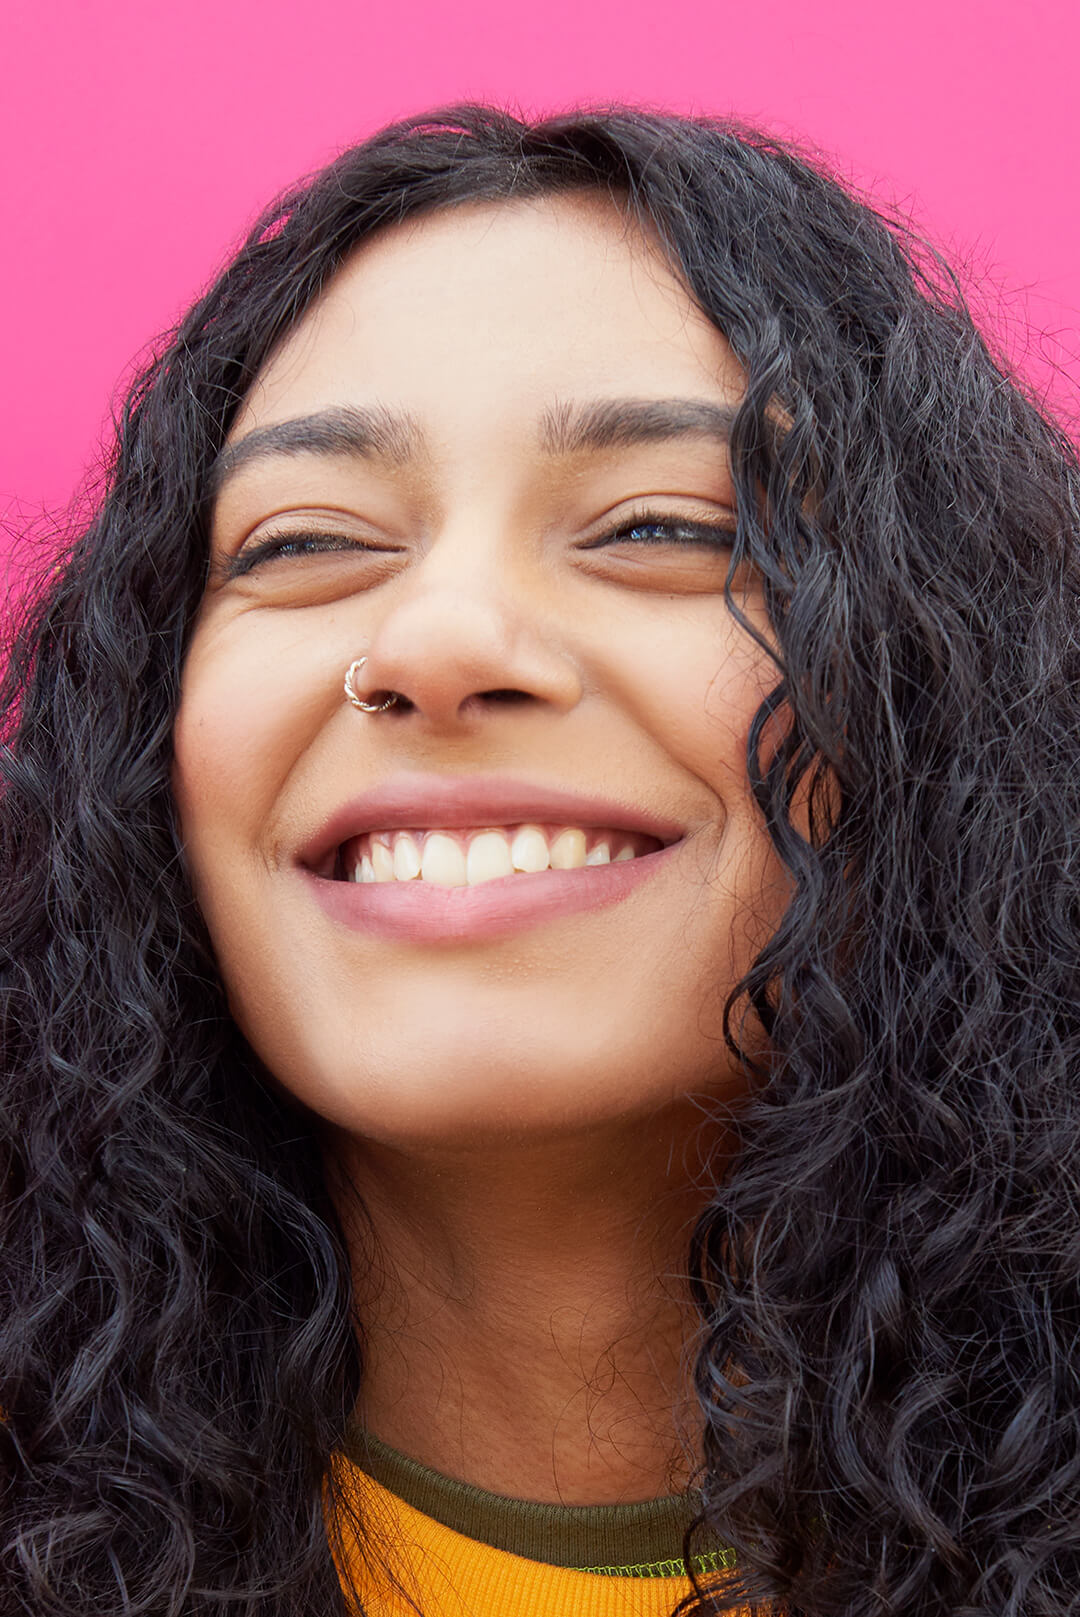 7 Upper Lip Hair Removal Methods to Try | IPSY